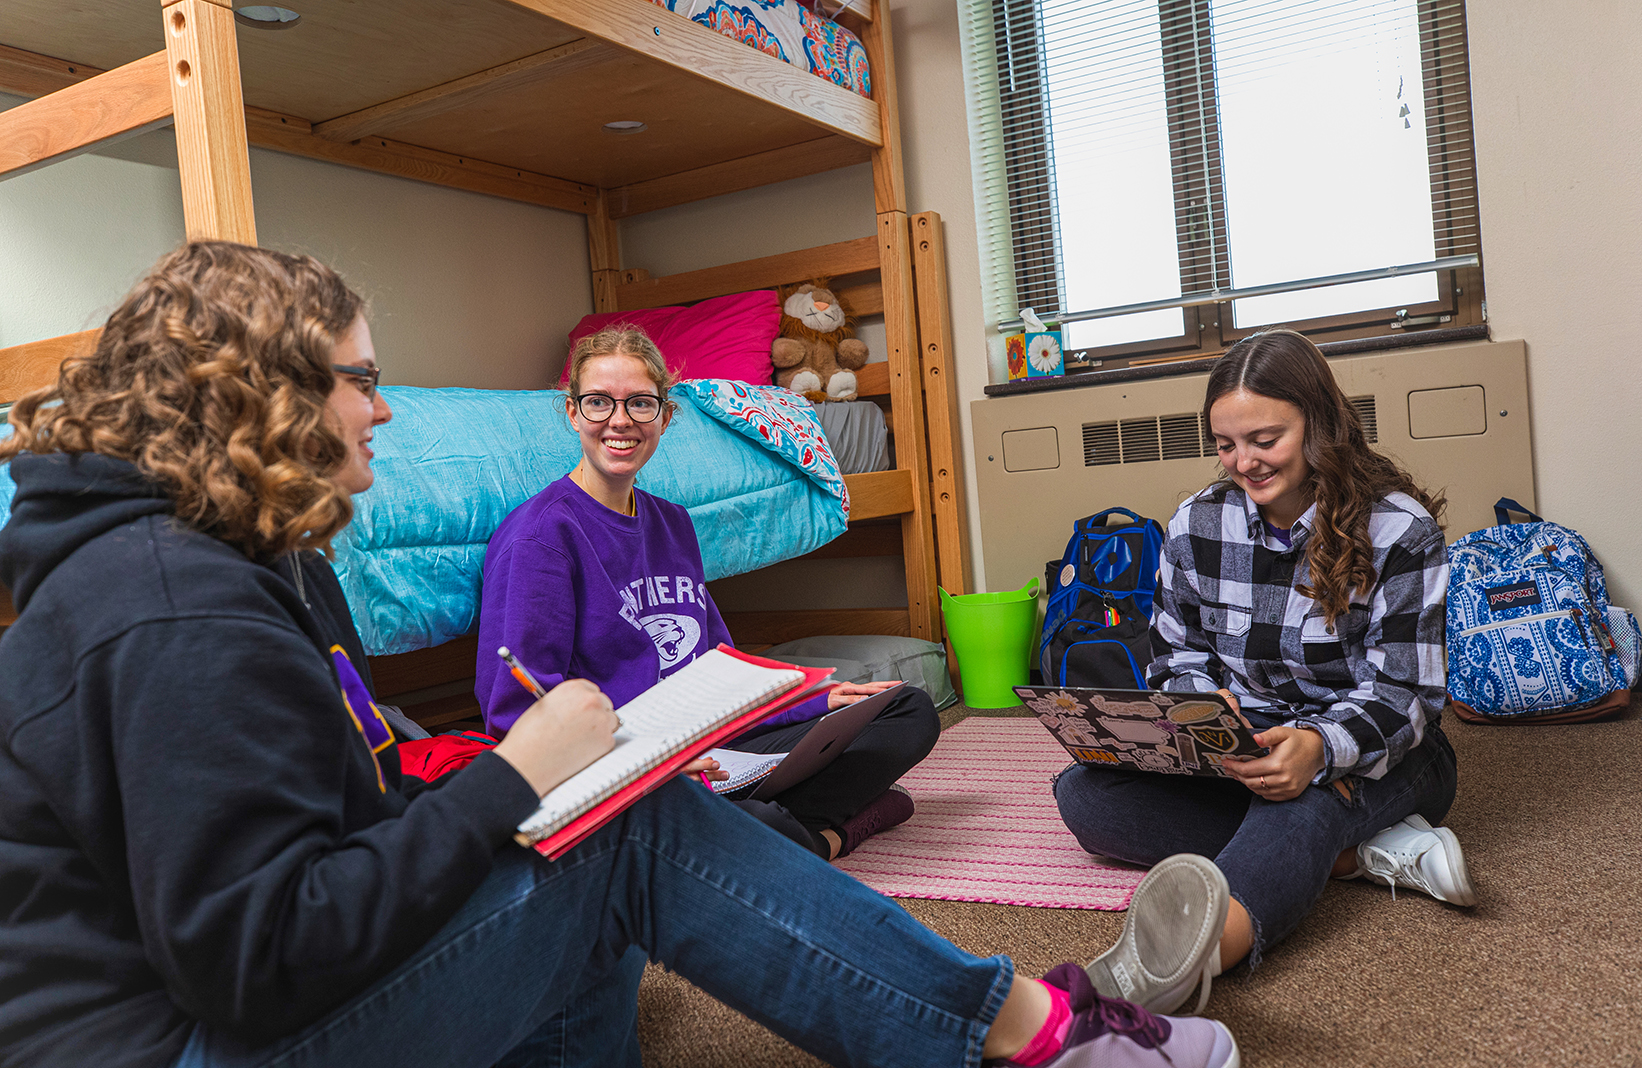 Group of three female students interacting and studying together in dorm room.